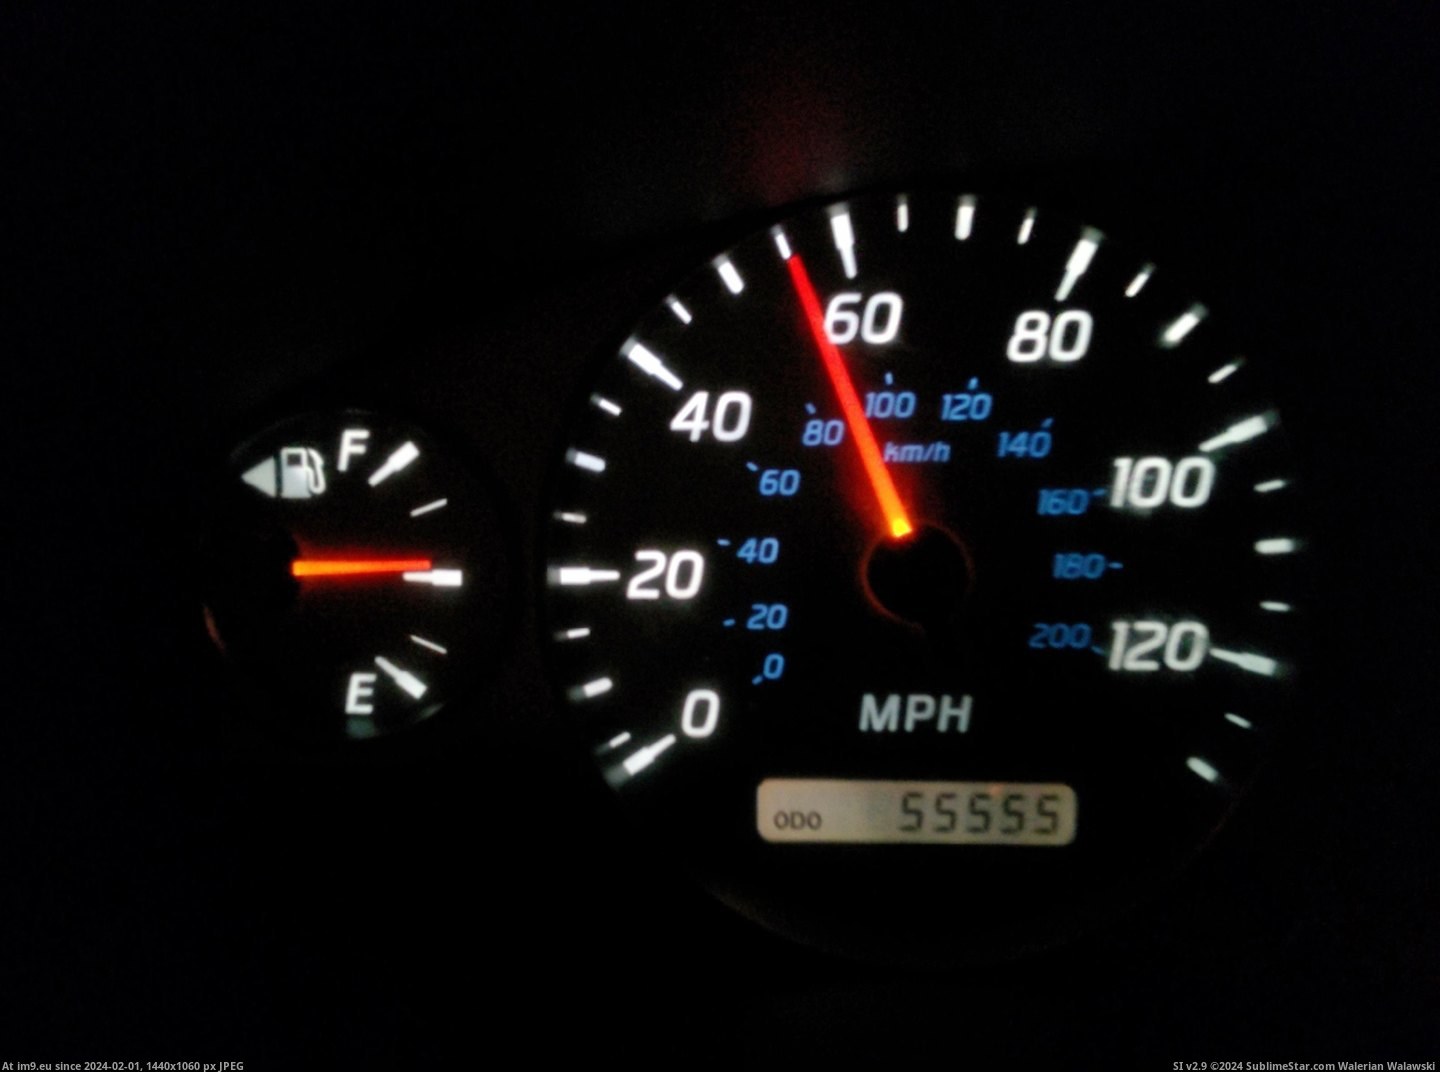 #Gas #Miles #Odometer #Tank #Mph [Mildlyinteresting] 55555 miles on my odometer, going 55 mph, with just under 55% of gas in my tank. Pic. (Obraz z album My r/MILDLYINTERESTING favs))